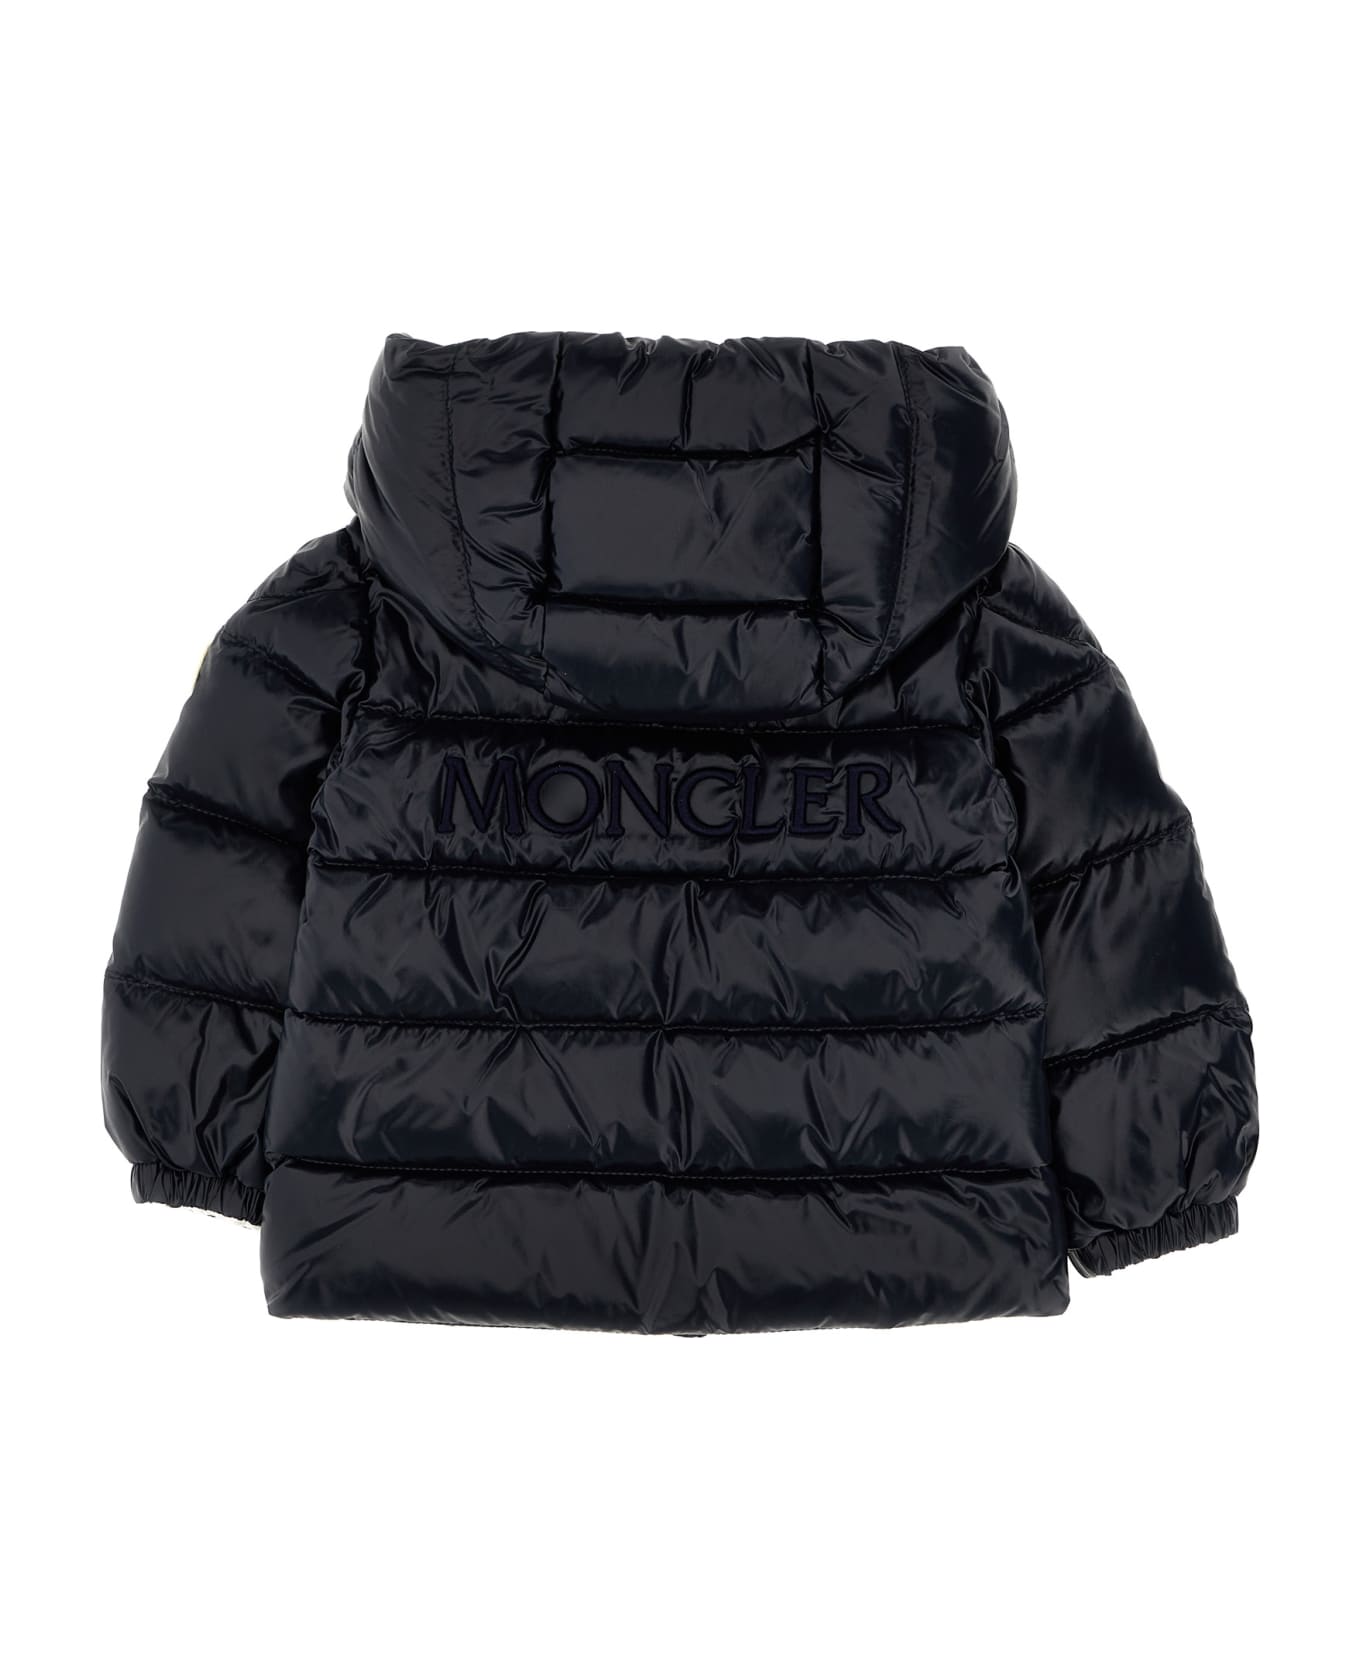 Moncler 'anand' Down Jacket - NAVY